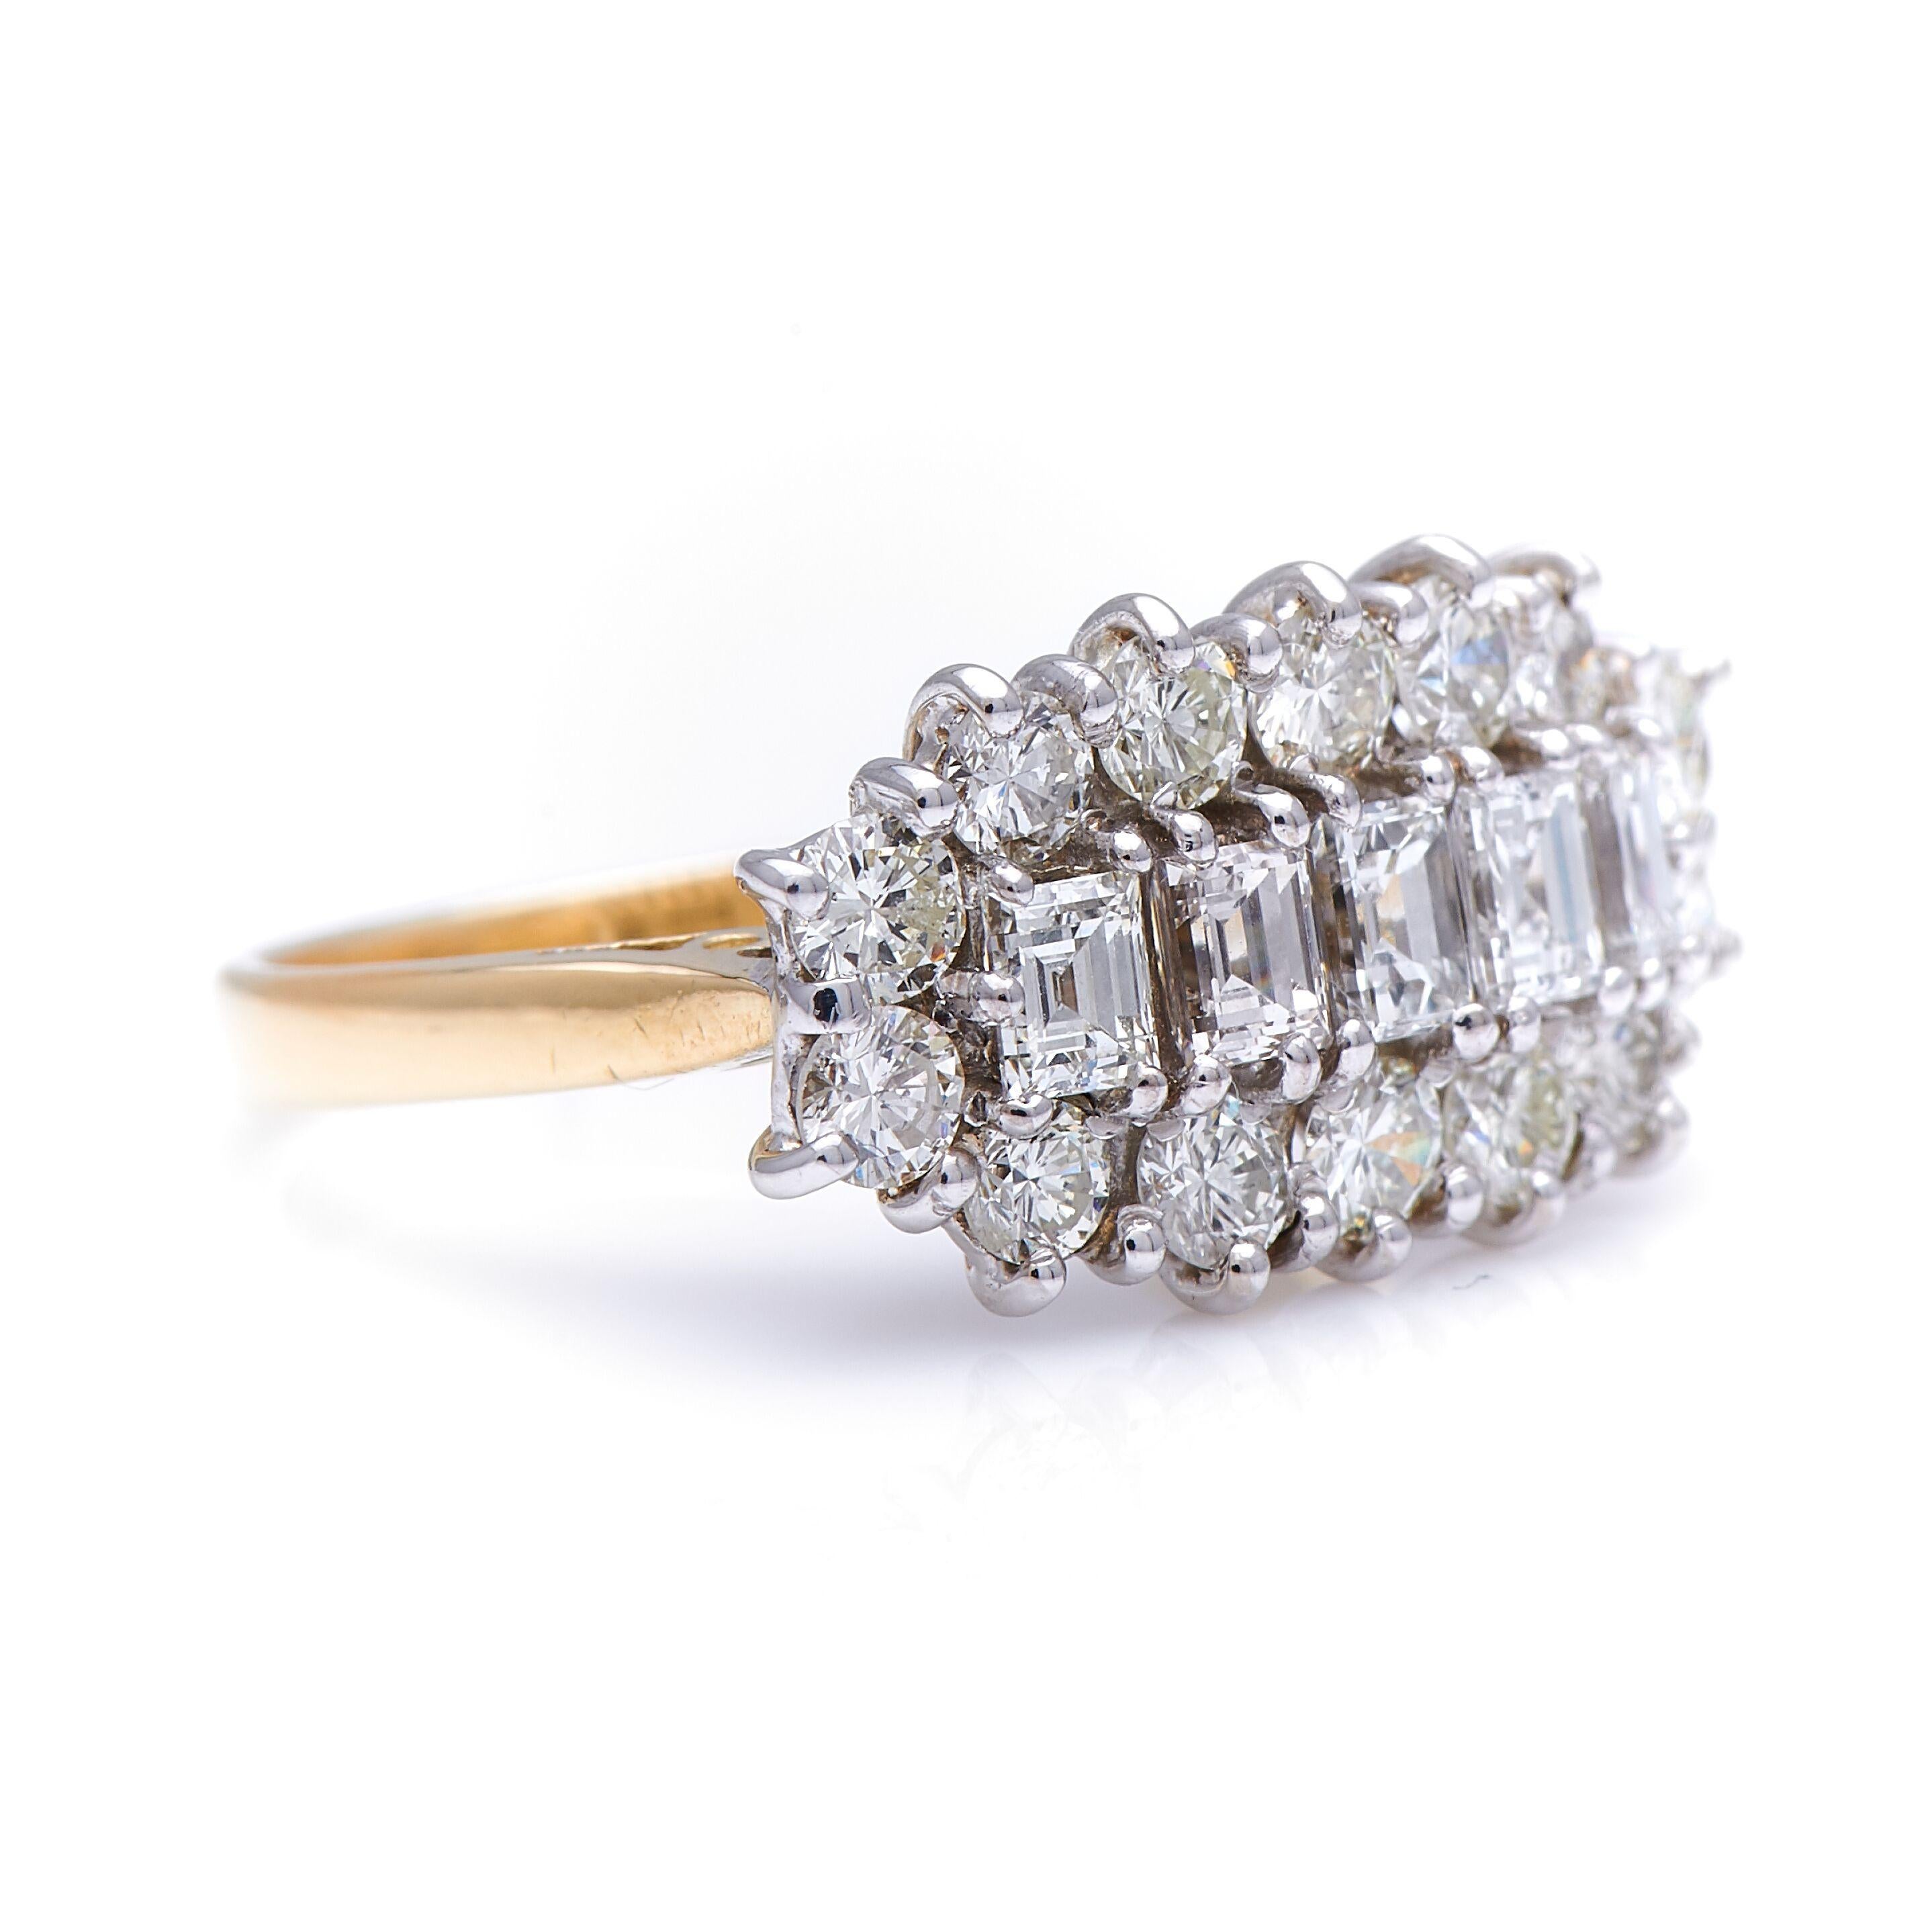 Diamond ring, 20th century. This ring is designed as a cluster of square and brilliant-cut diamonds, cleverly set together to create a glittering surface that beautifully plays with the light. Unusually for a cluster ring, the shape is aligned